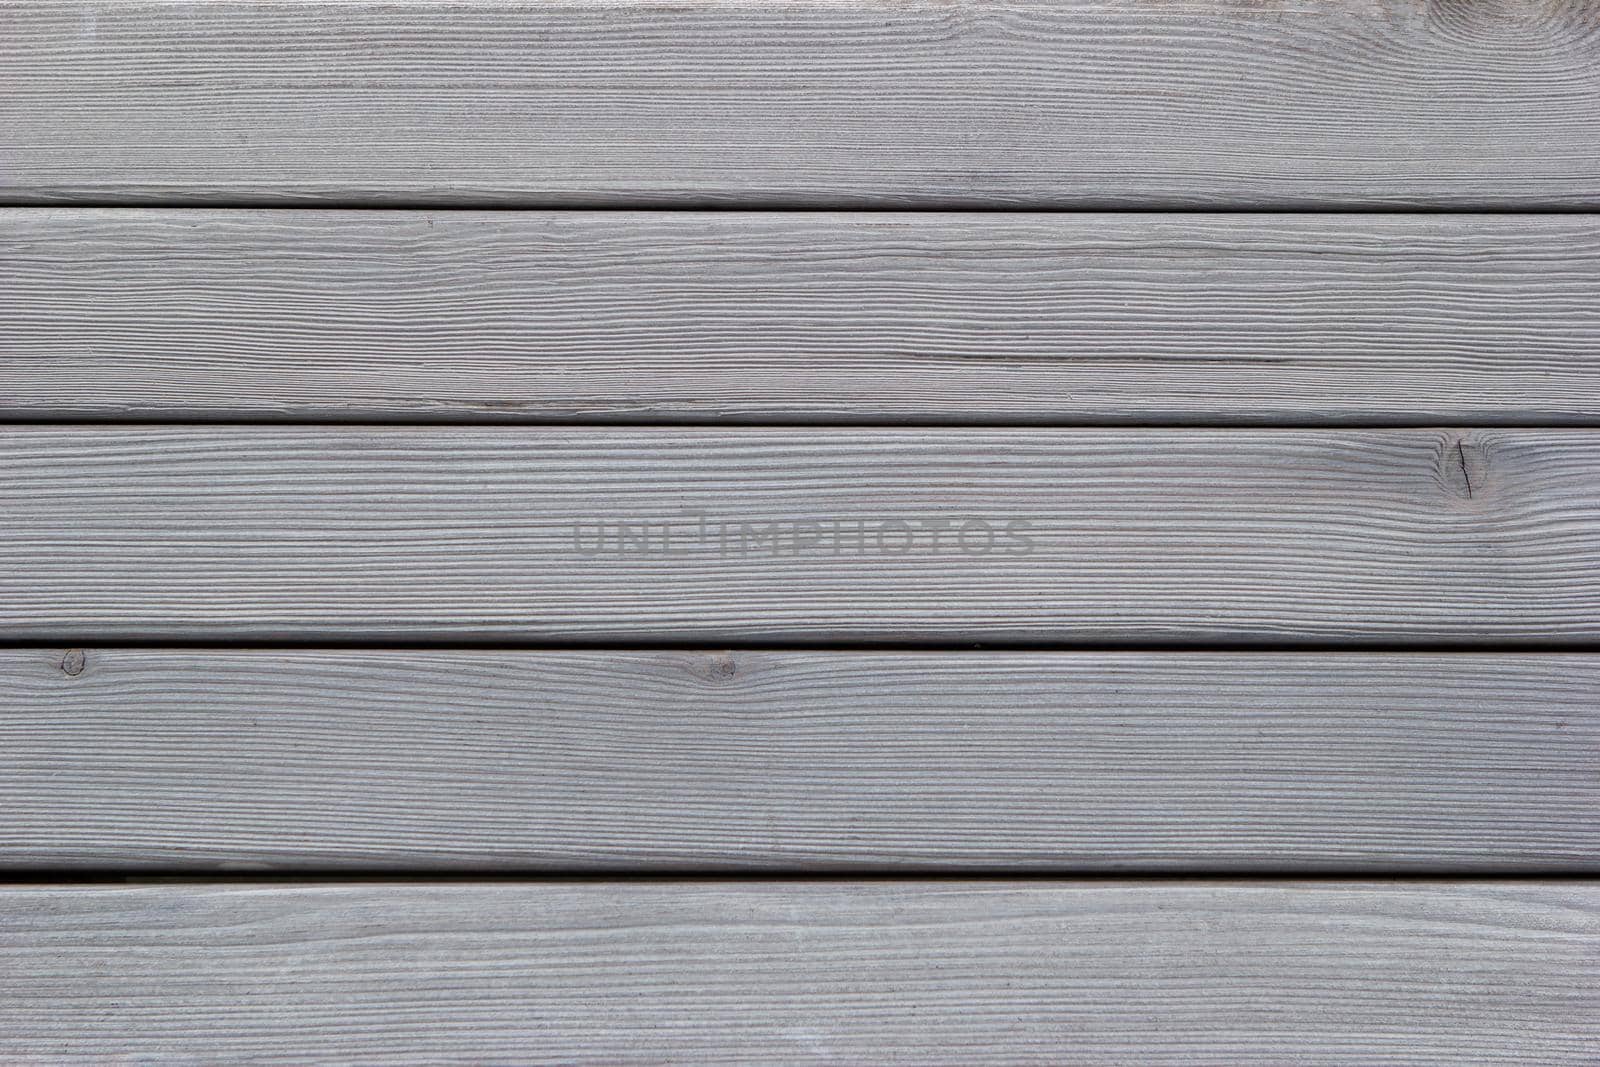 Background of wooden boards. Wooden flooring, top view